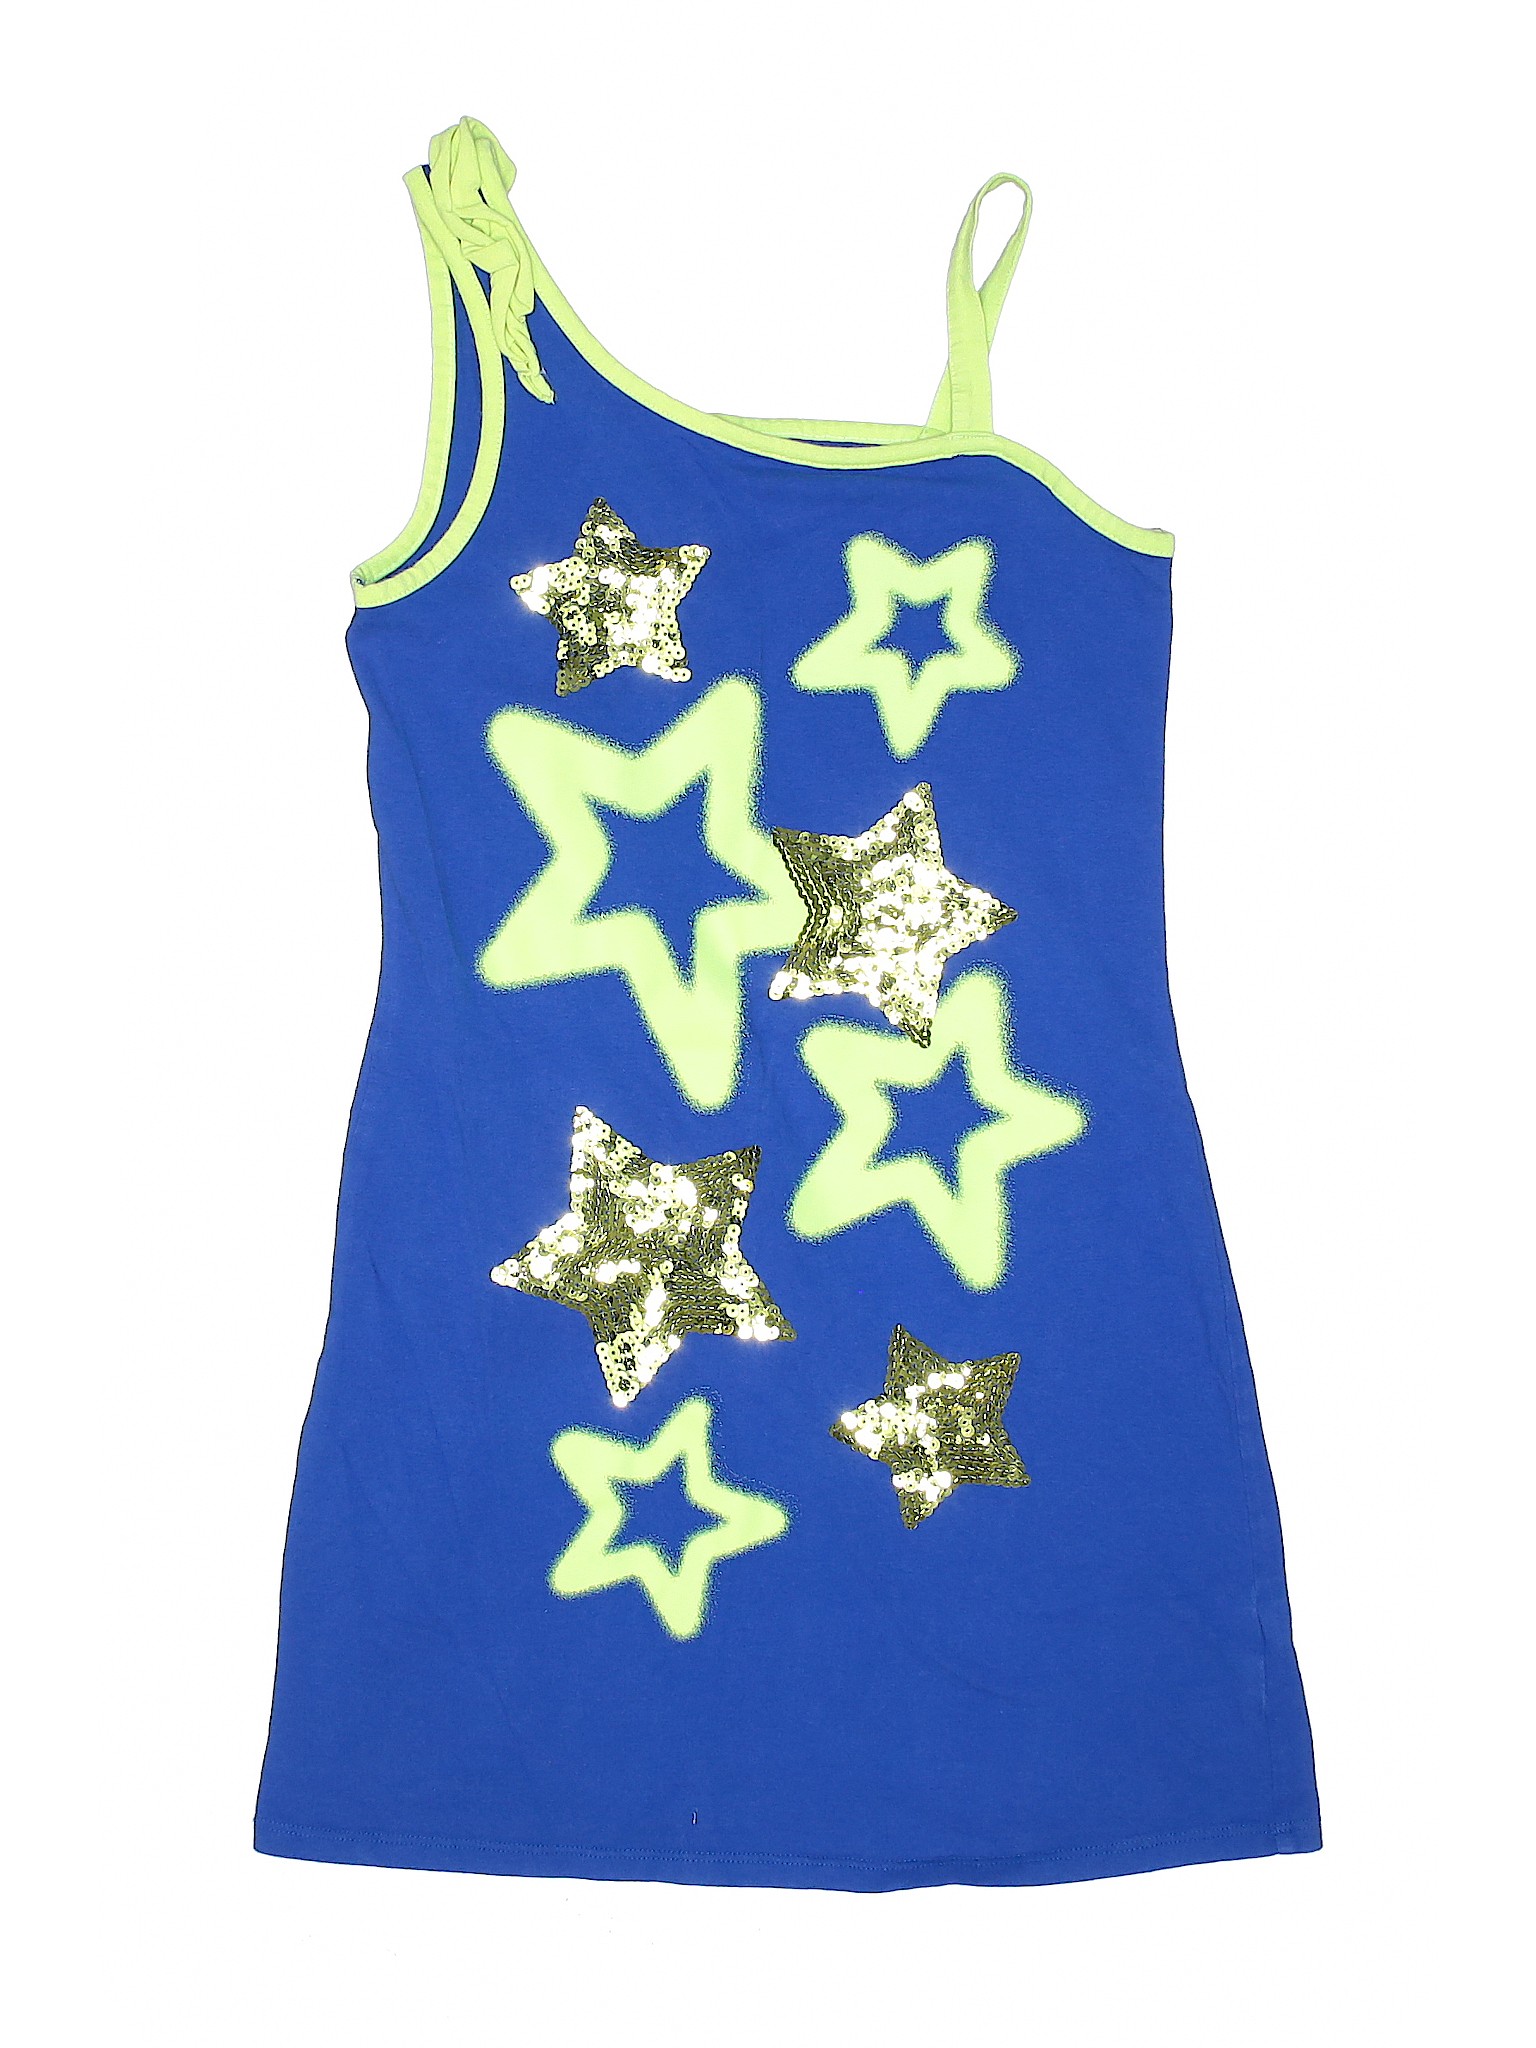 Justice Girls Blue Special Occasion Dress 8 | eBay